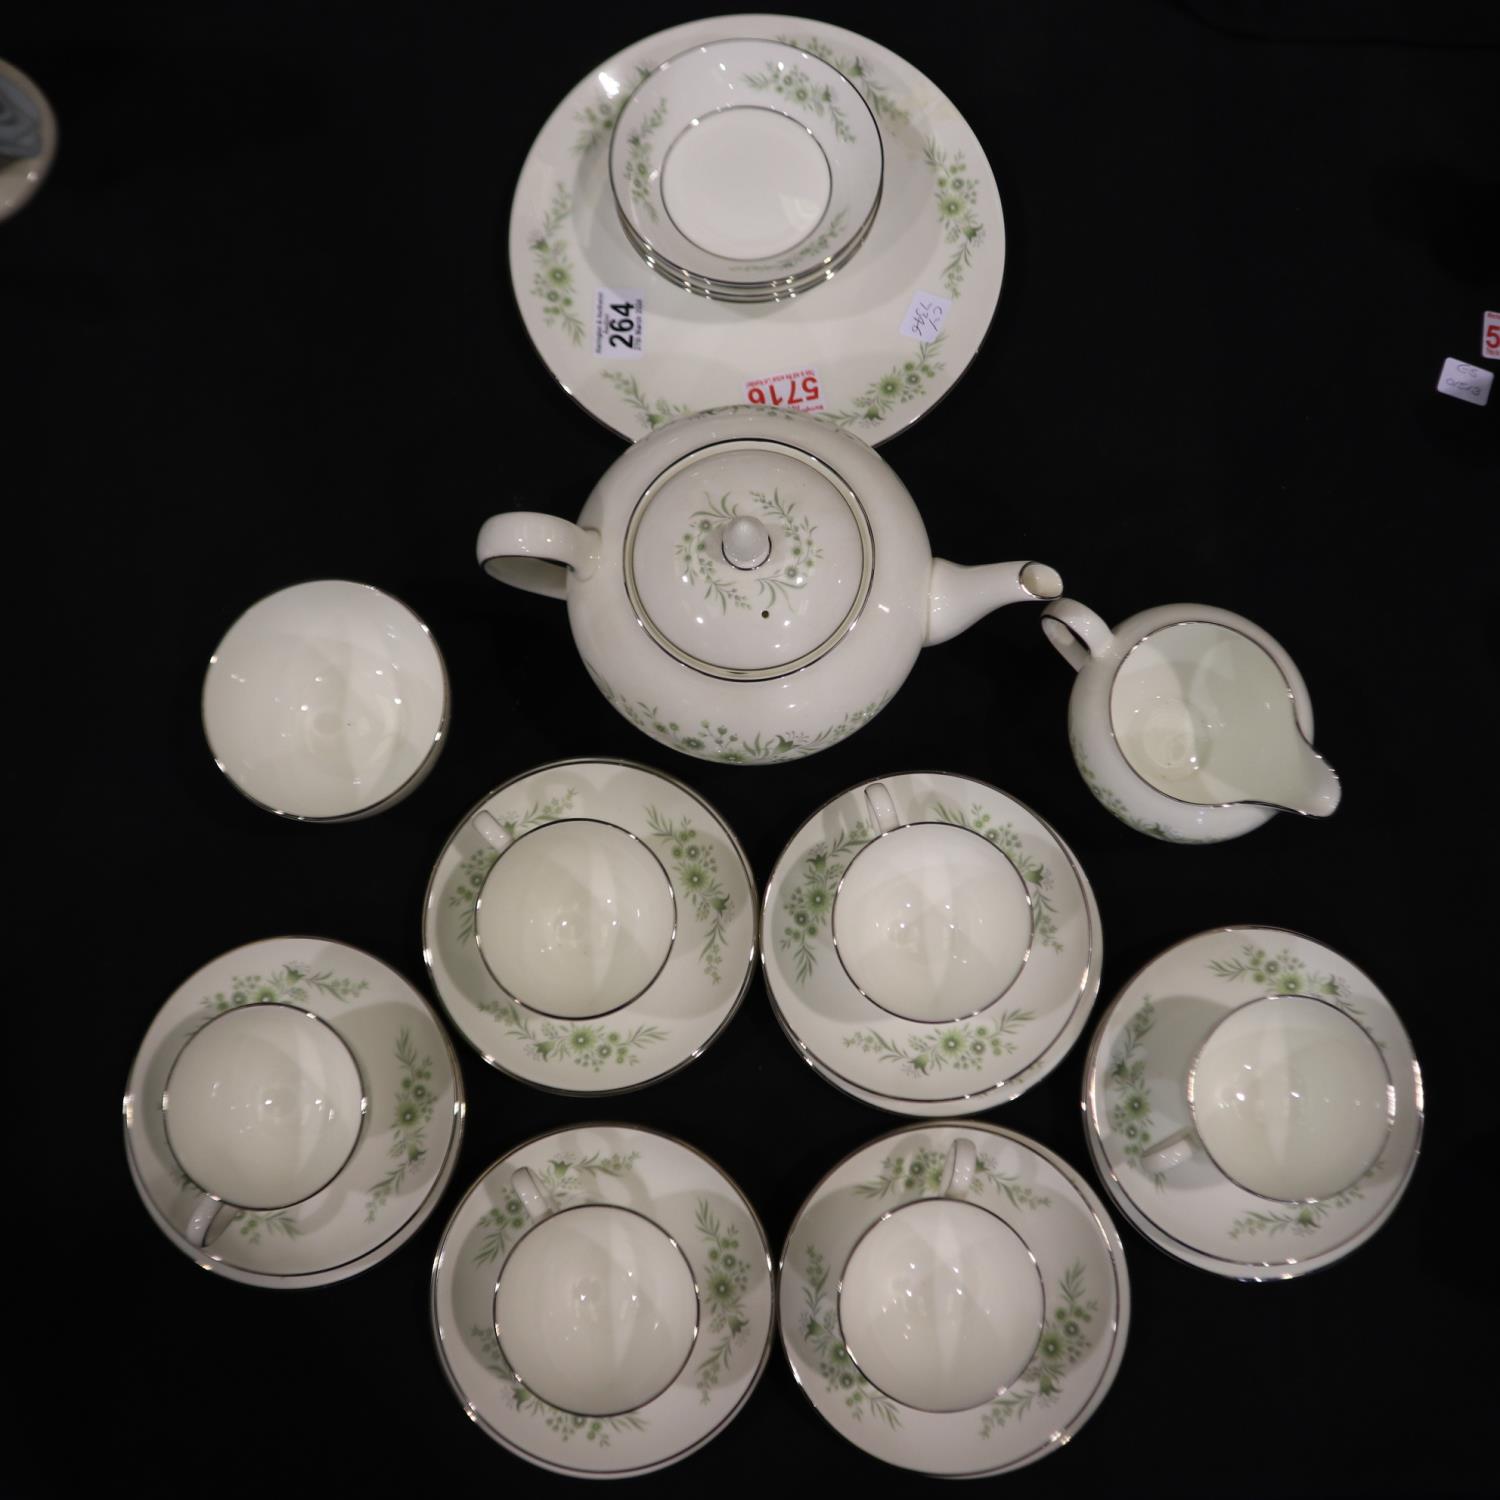 Twenty six piece Wedgwood tea service in the Westbury pattern, no chips or cracks. Not available for